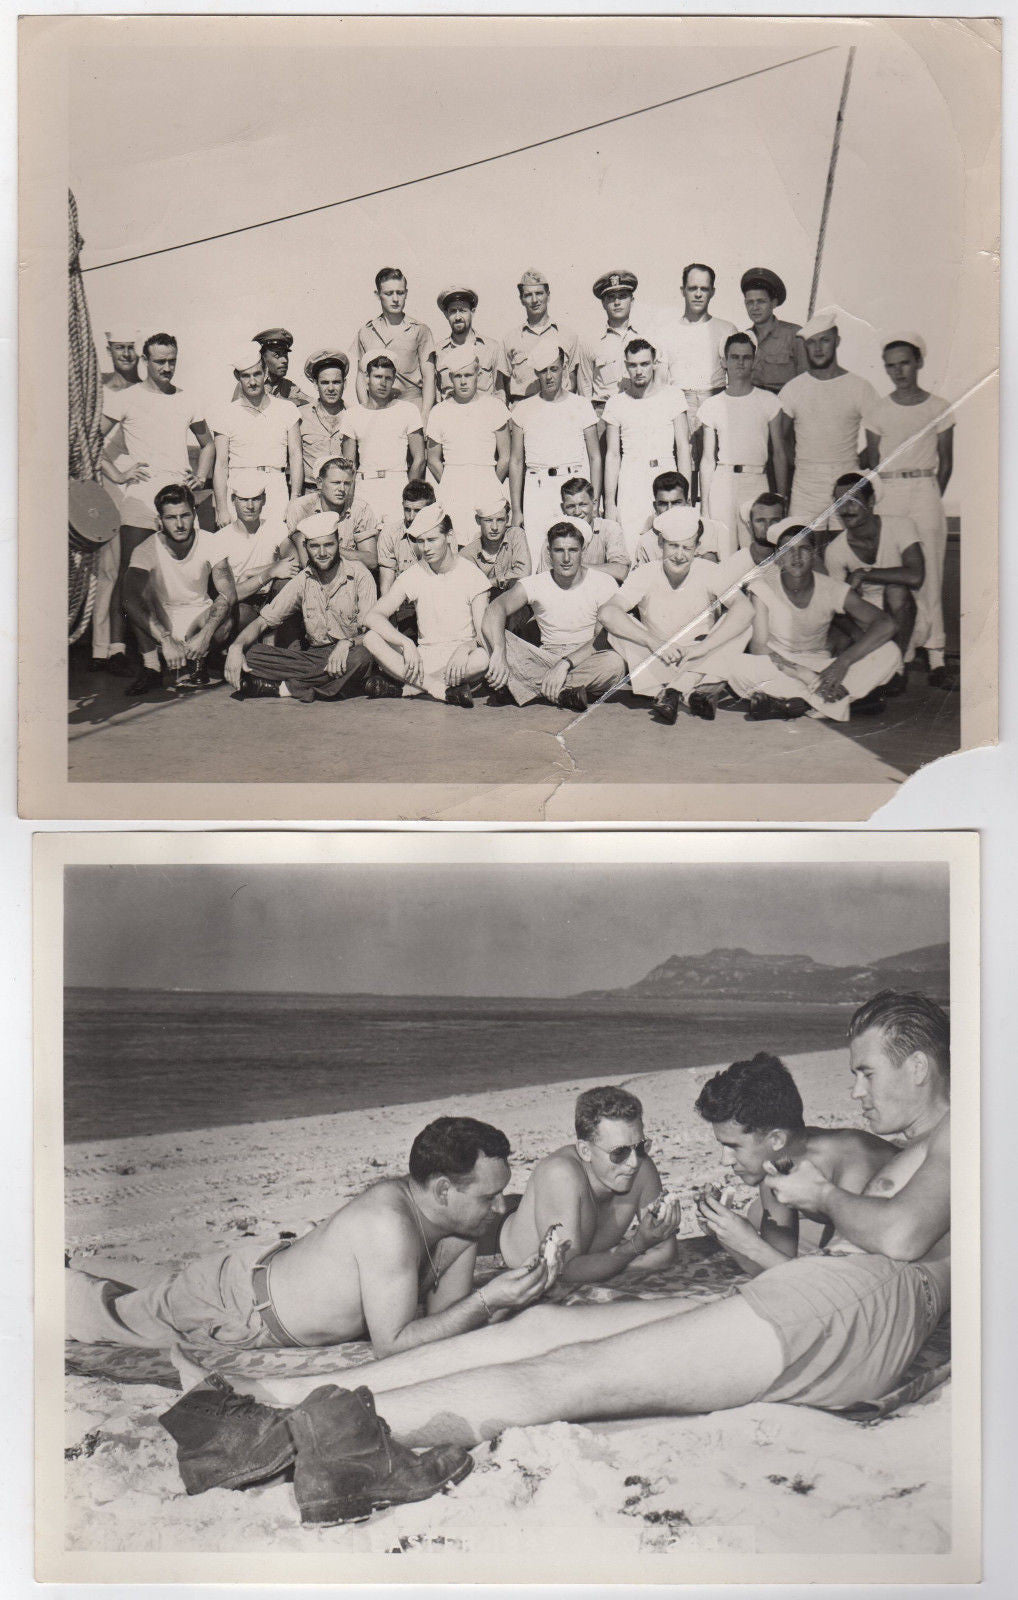 NUCLEAR ATOMIC BOMB BAKER WWII PHOTOGRAPERS ID CARD BIKINI ATOLL MILITARY PHOTOS - K-townConsignments